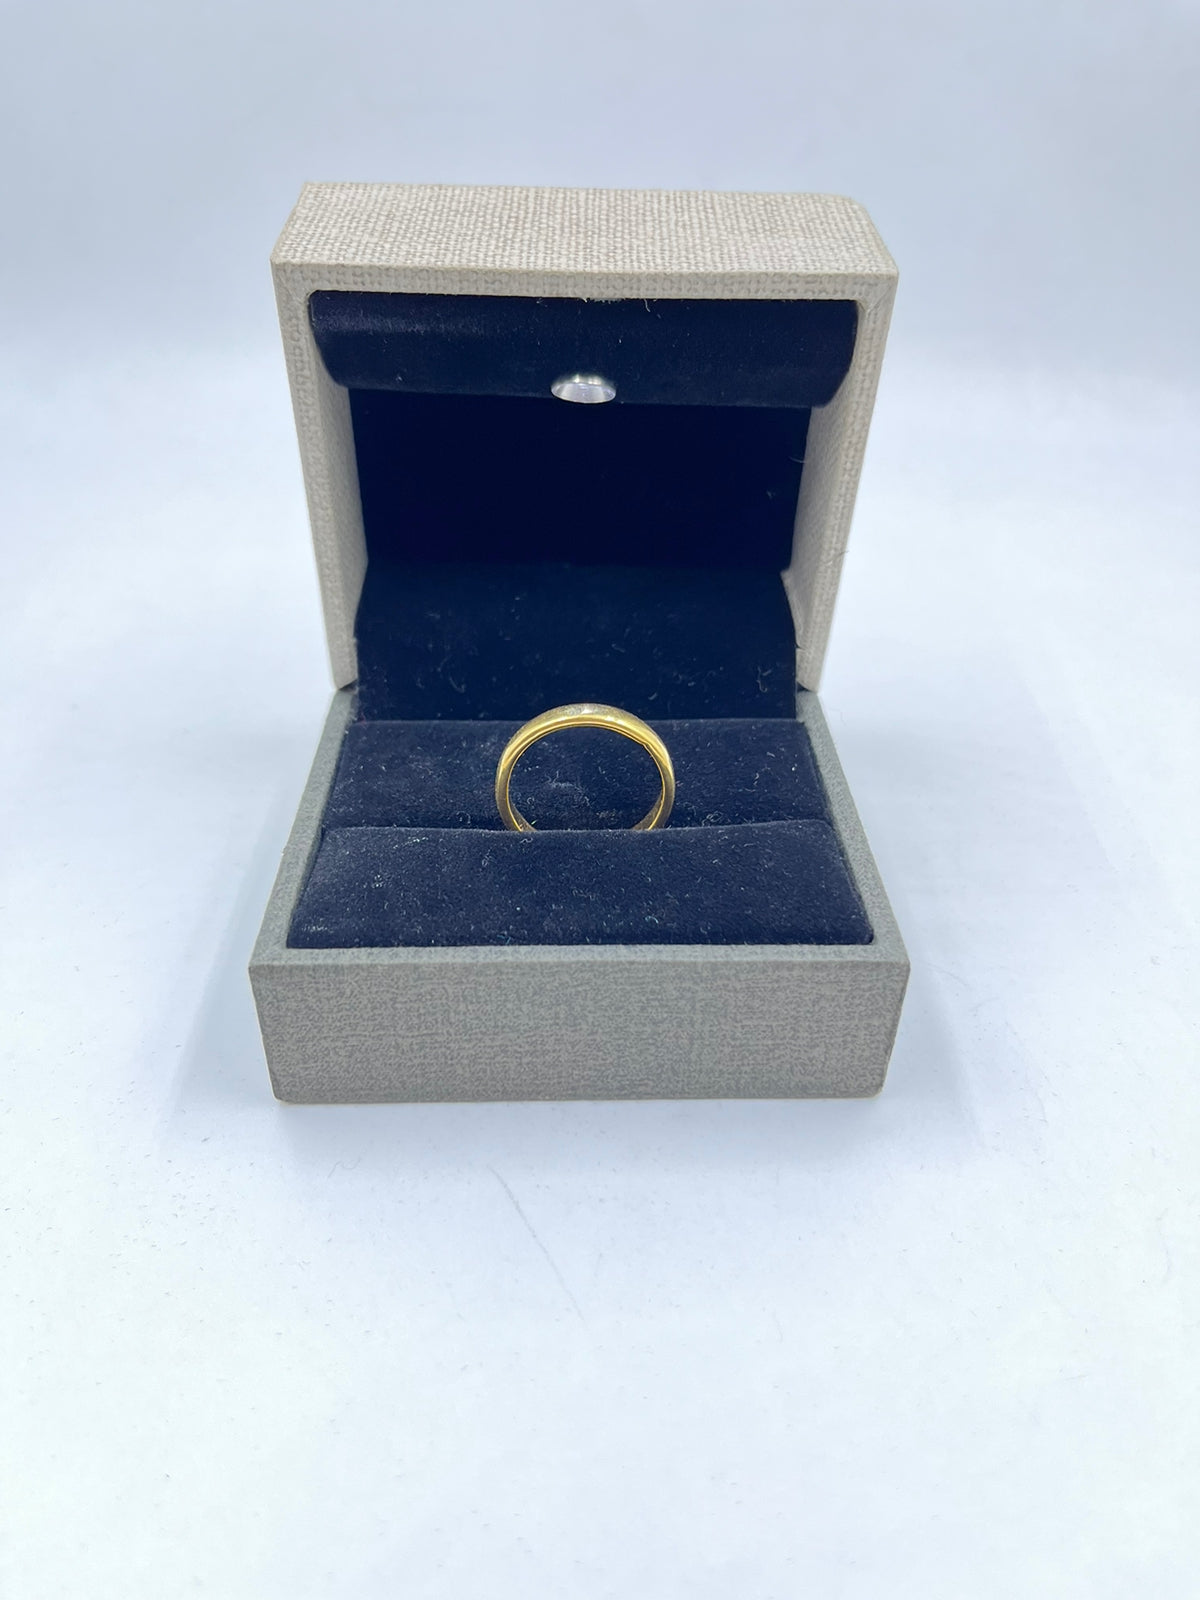 1 Gram Gold Forming Mudra with Diamond Best Quality Ring for Men - Style  A903 - Soni Fashion at Rs 2040.00, Rajkot | ID: 2853158129597